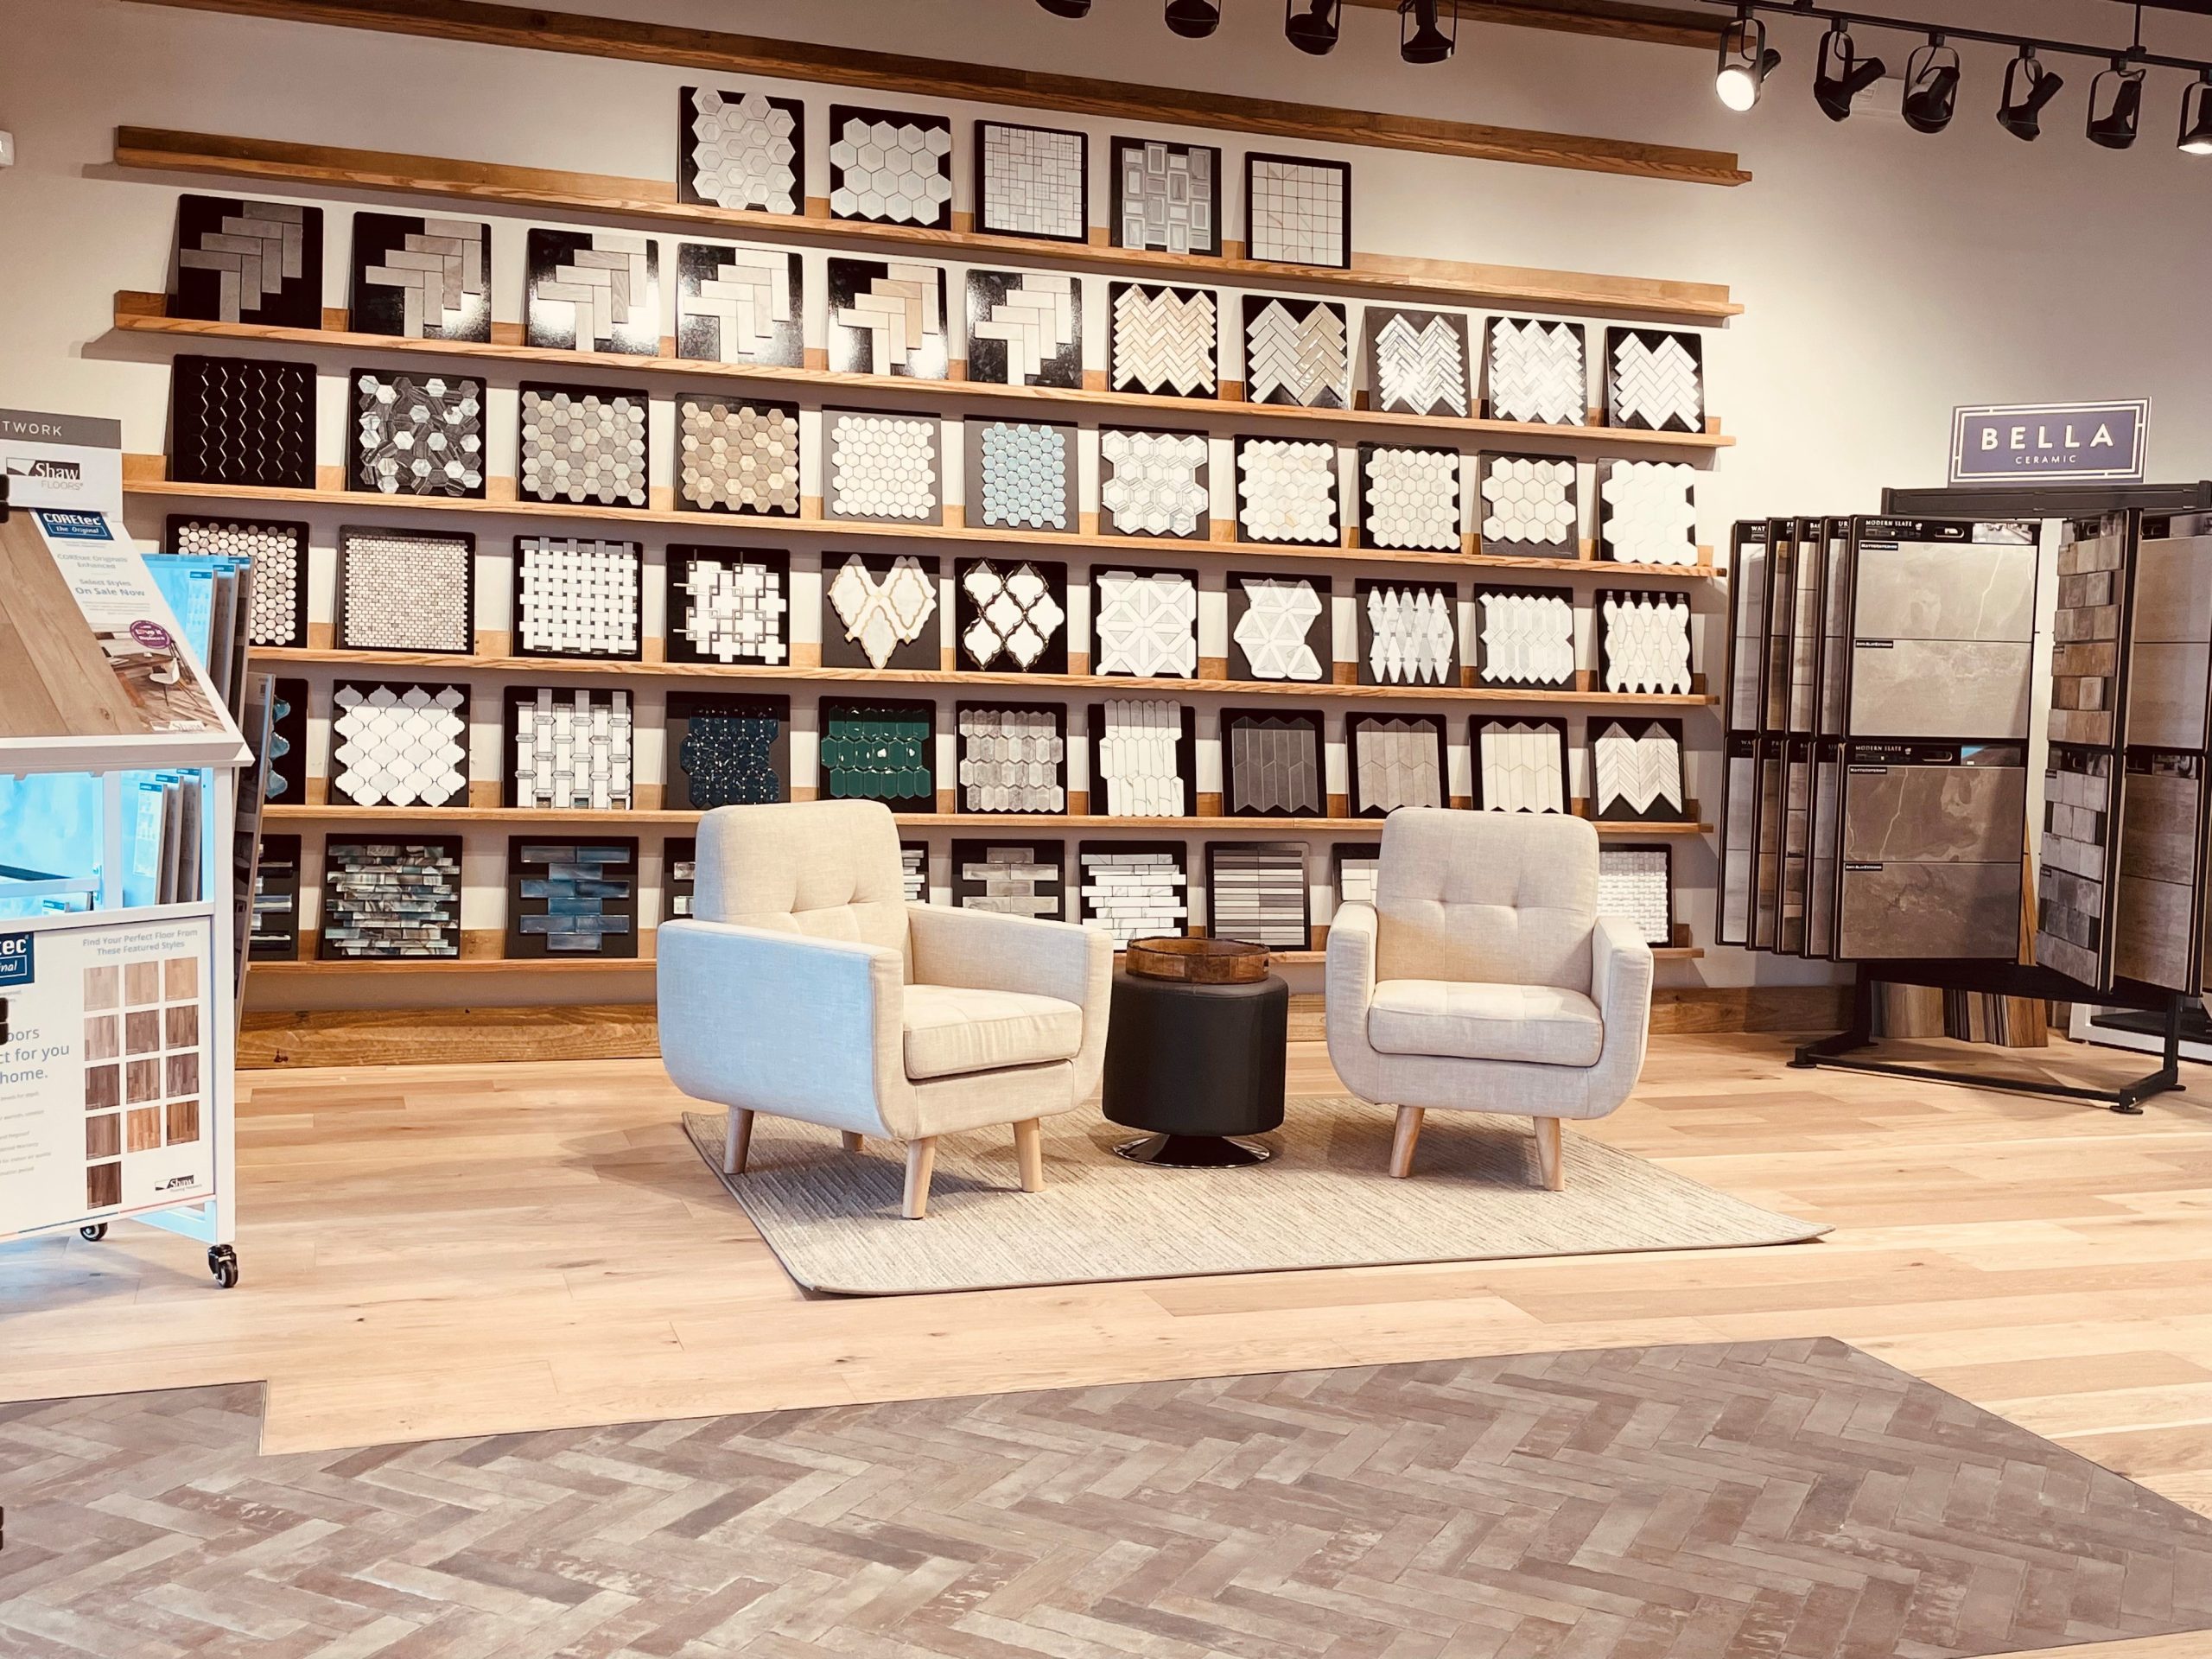 Brian's Flooring & Design announces opening of fourth showroom in Trussville